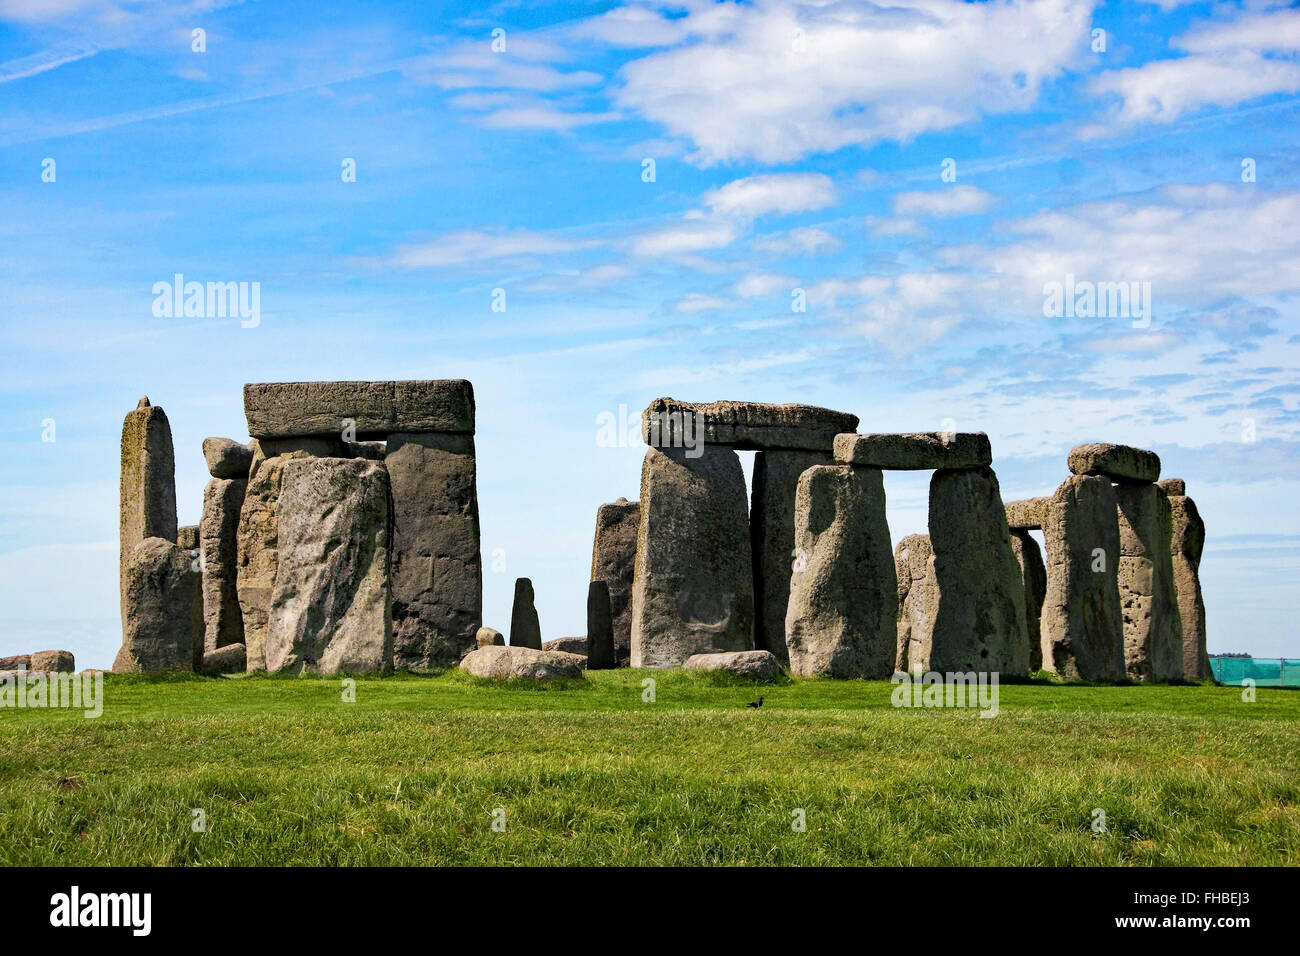 Stonehenge, stone age megaliths in Great Britain. Stock Photo